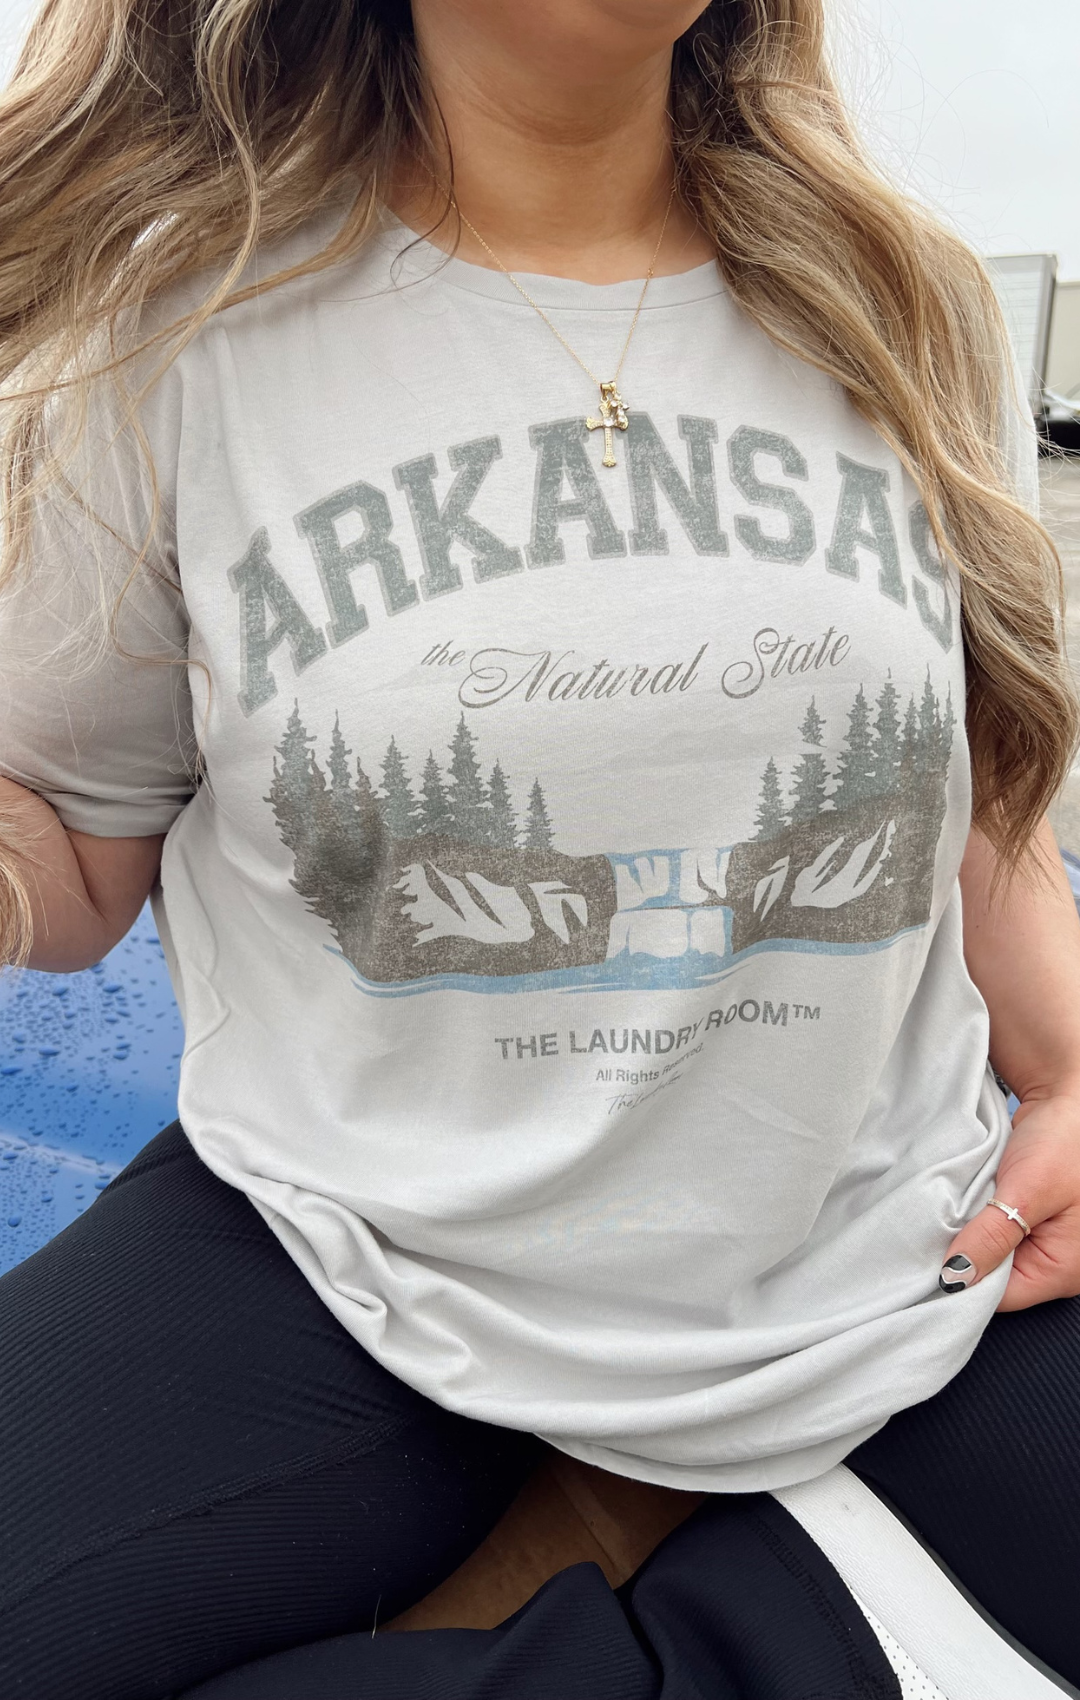 The Arkansas Natural State Tee by The Laundry Room